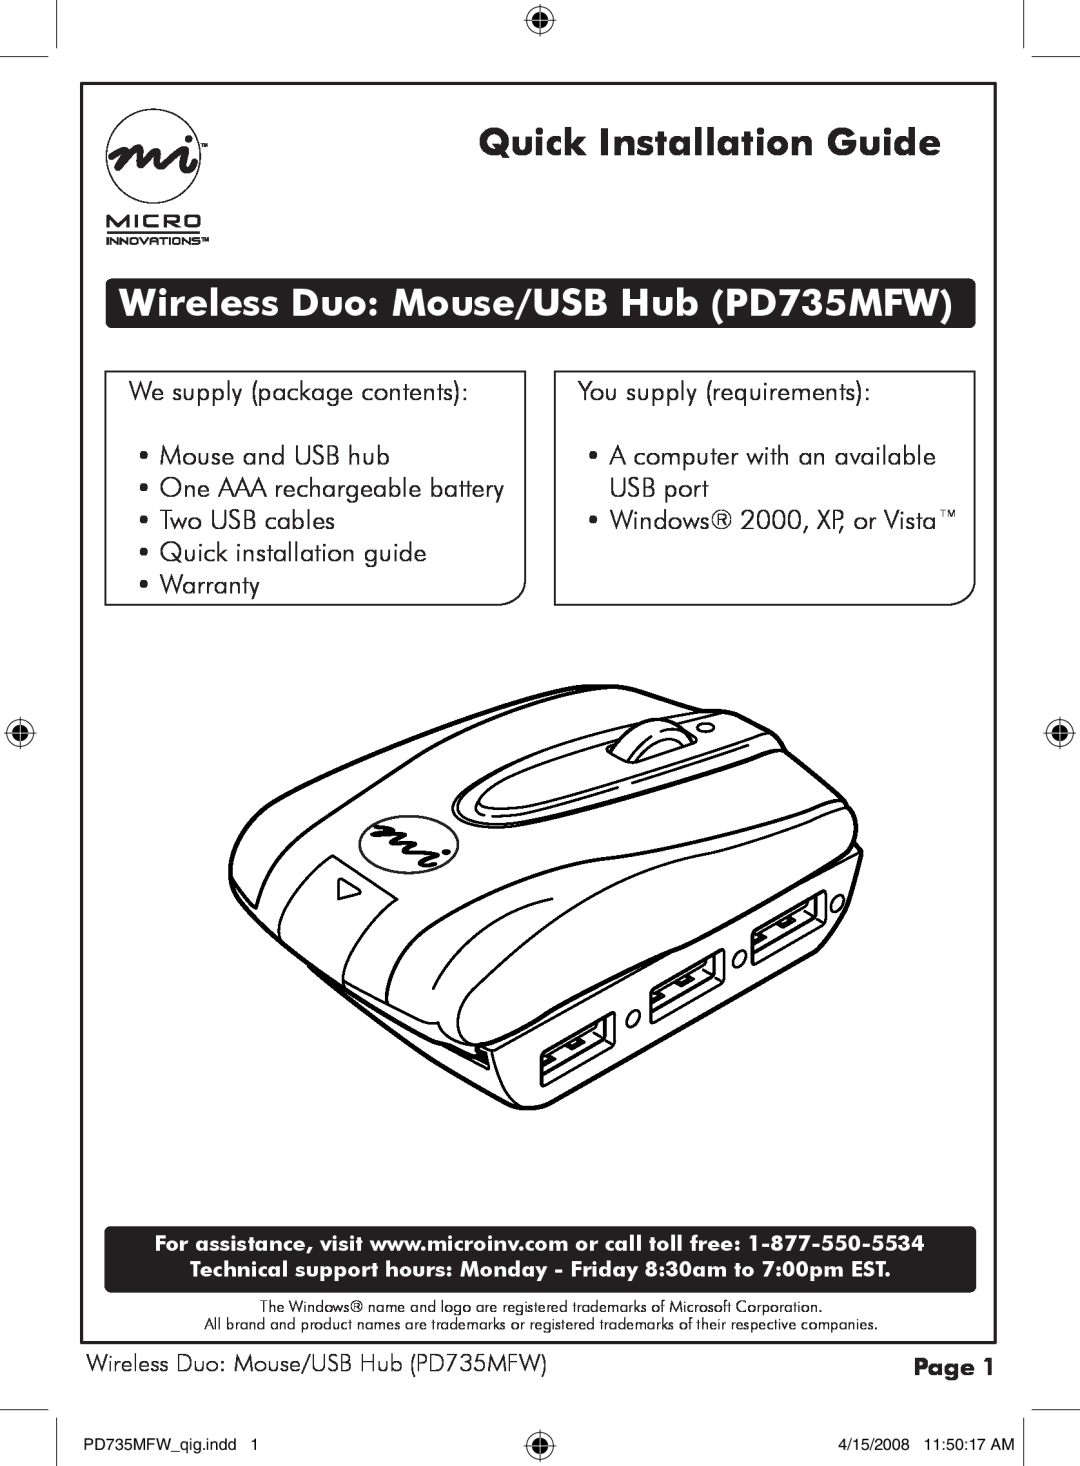 Micro Innovations warranty Quick Installation Guide, Wireless Duo Mouse/USB Hub PD735MFW, Windows 2000, XP, or Vista 